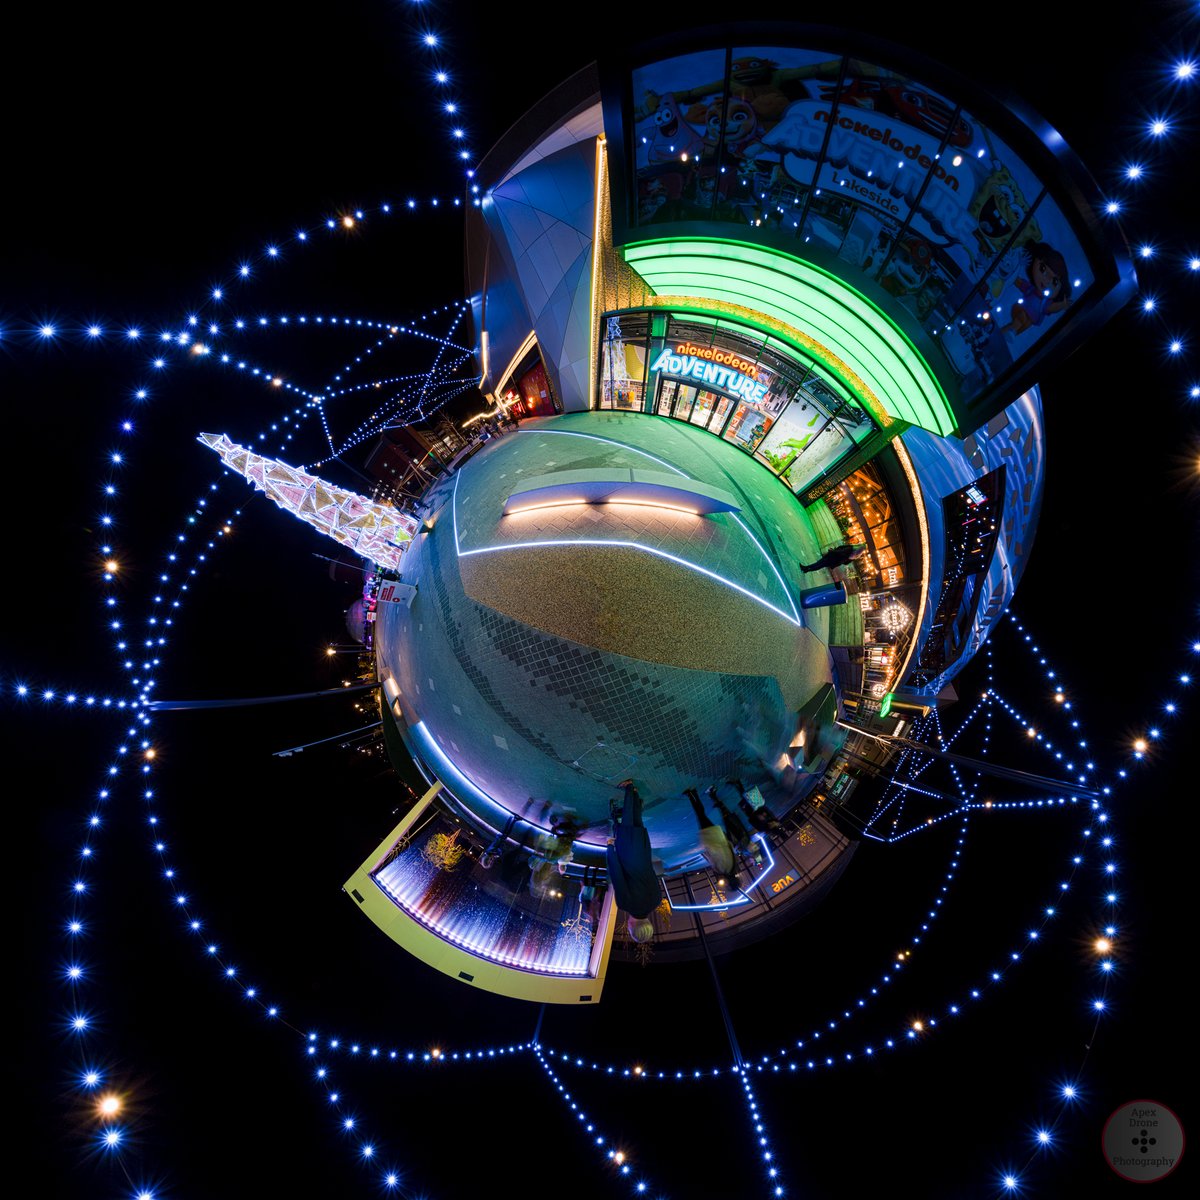 Lakeside Christmas Lights #360degrees #360photography  #360camera #360view  #lifein360 #christmastree  #merrychristmas  #christmastime  #chrismas #christmas🎄  #chritmas  #chistmas  #nightphotography  #nightphotos  #nightshot  #nightlights  #nightscapes